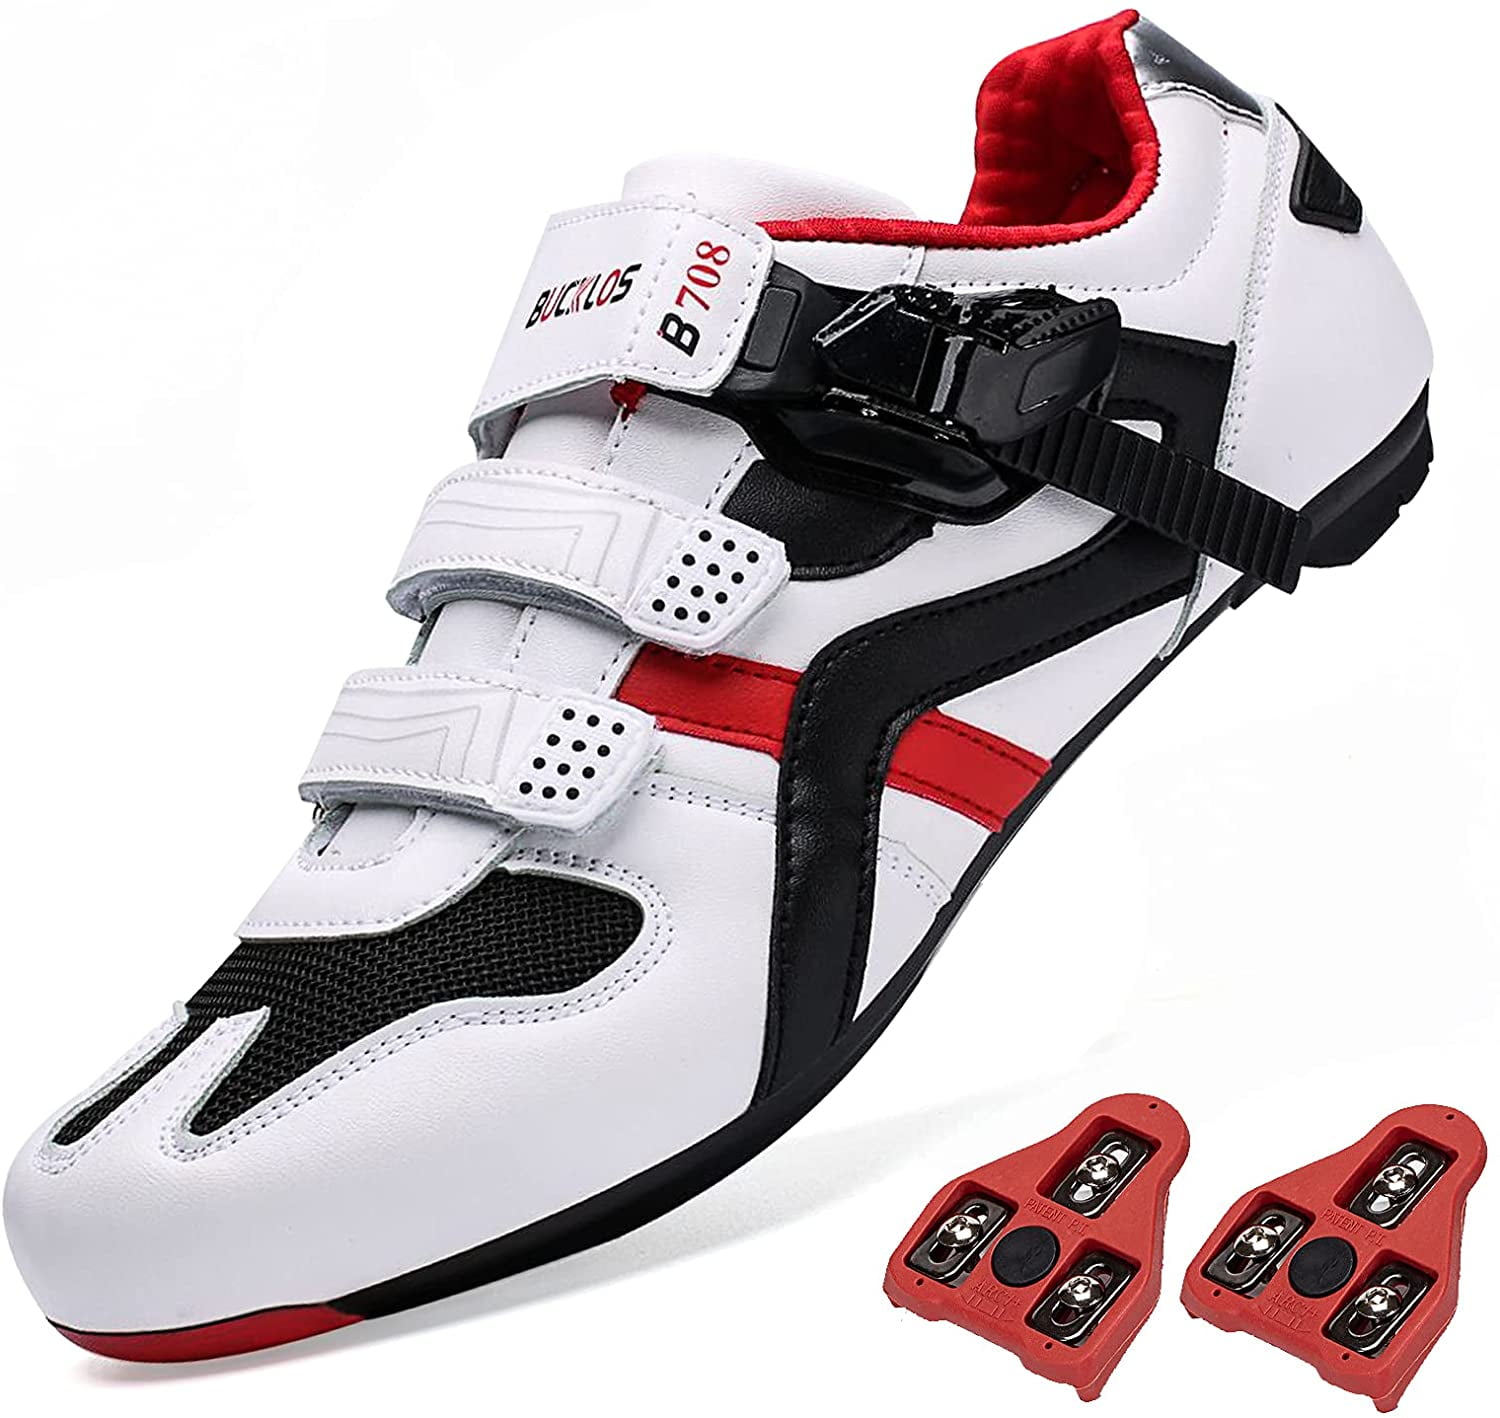 Details about   Cycling Shoes Mens Self-locking SPD-SL Cleat Road Bike Bicycle Sneakers Peloton 